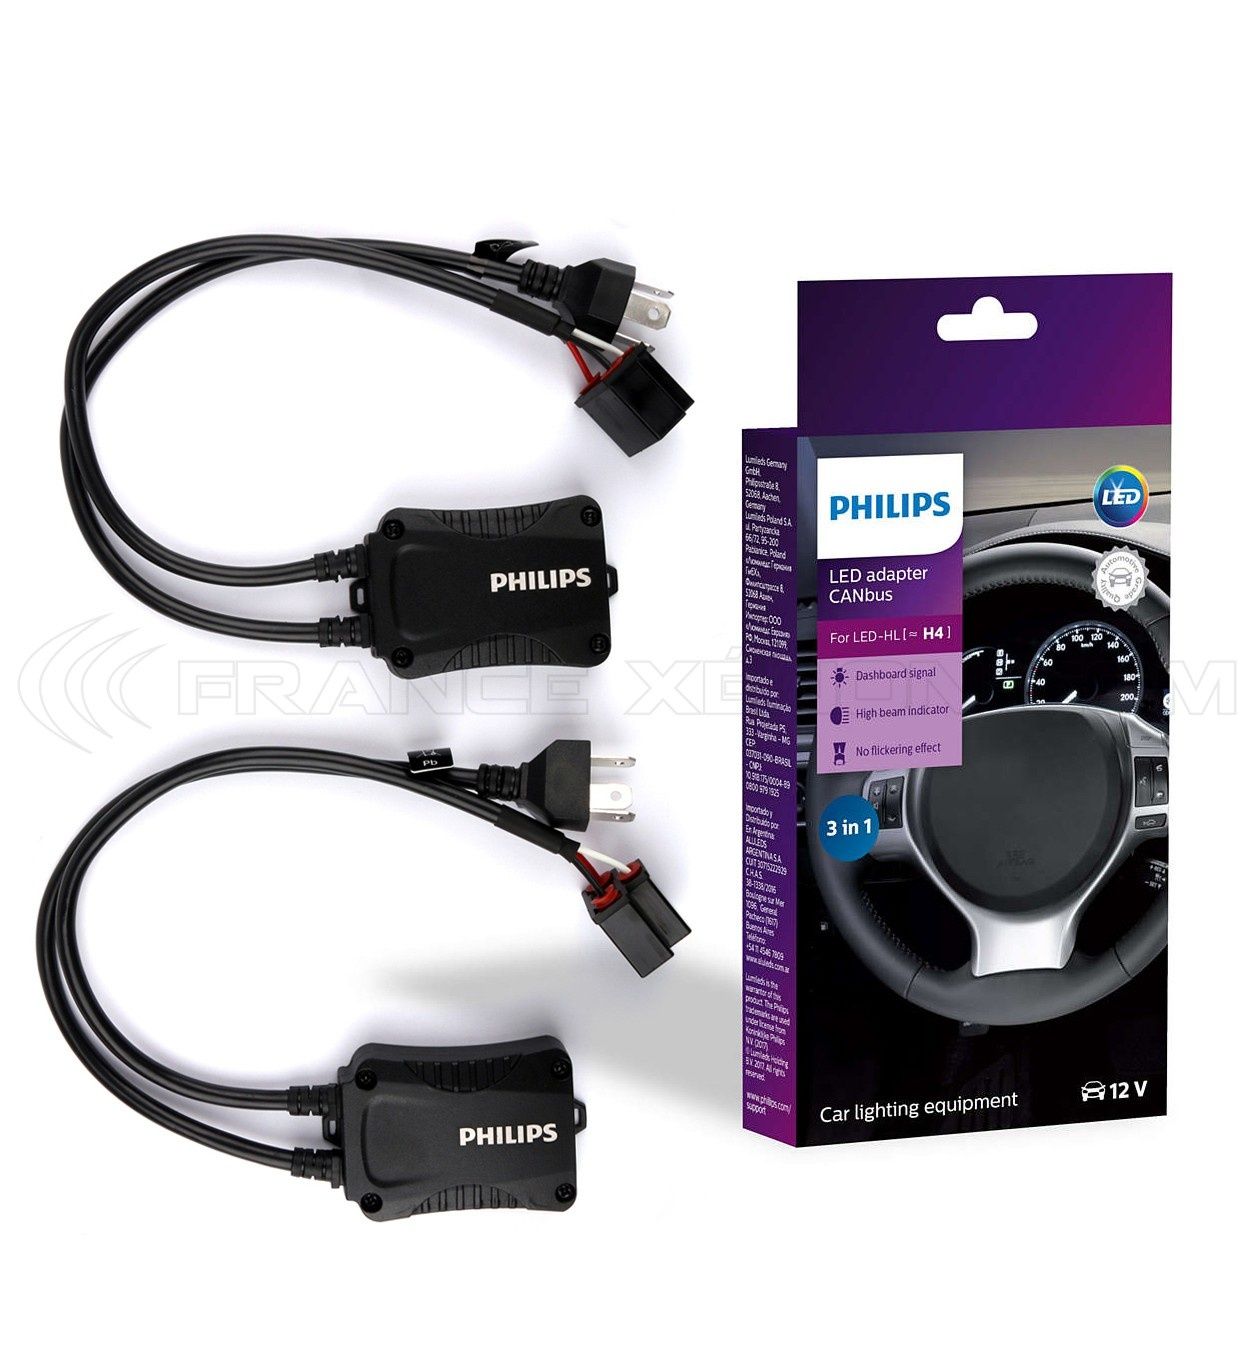 Adaptor Canbus led philips h4